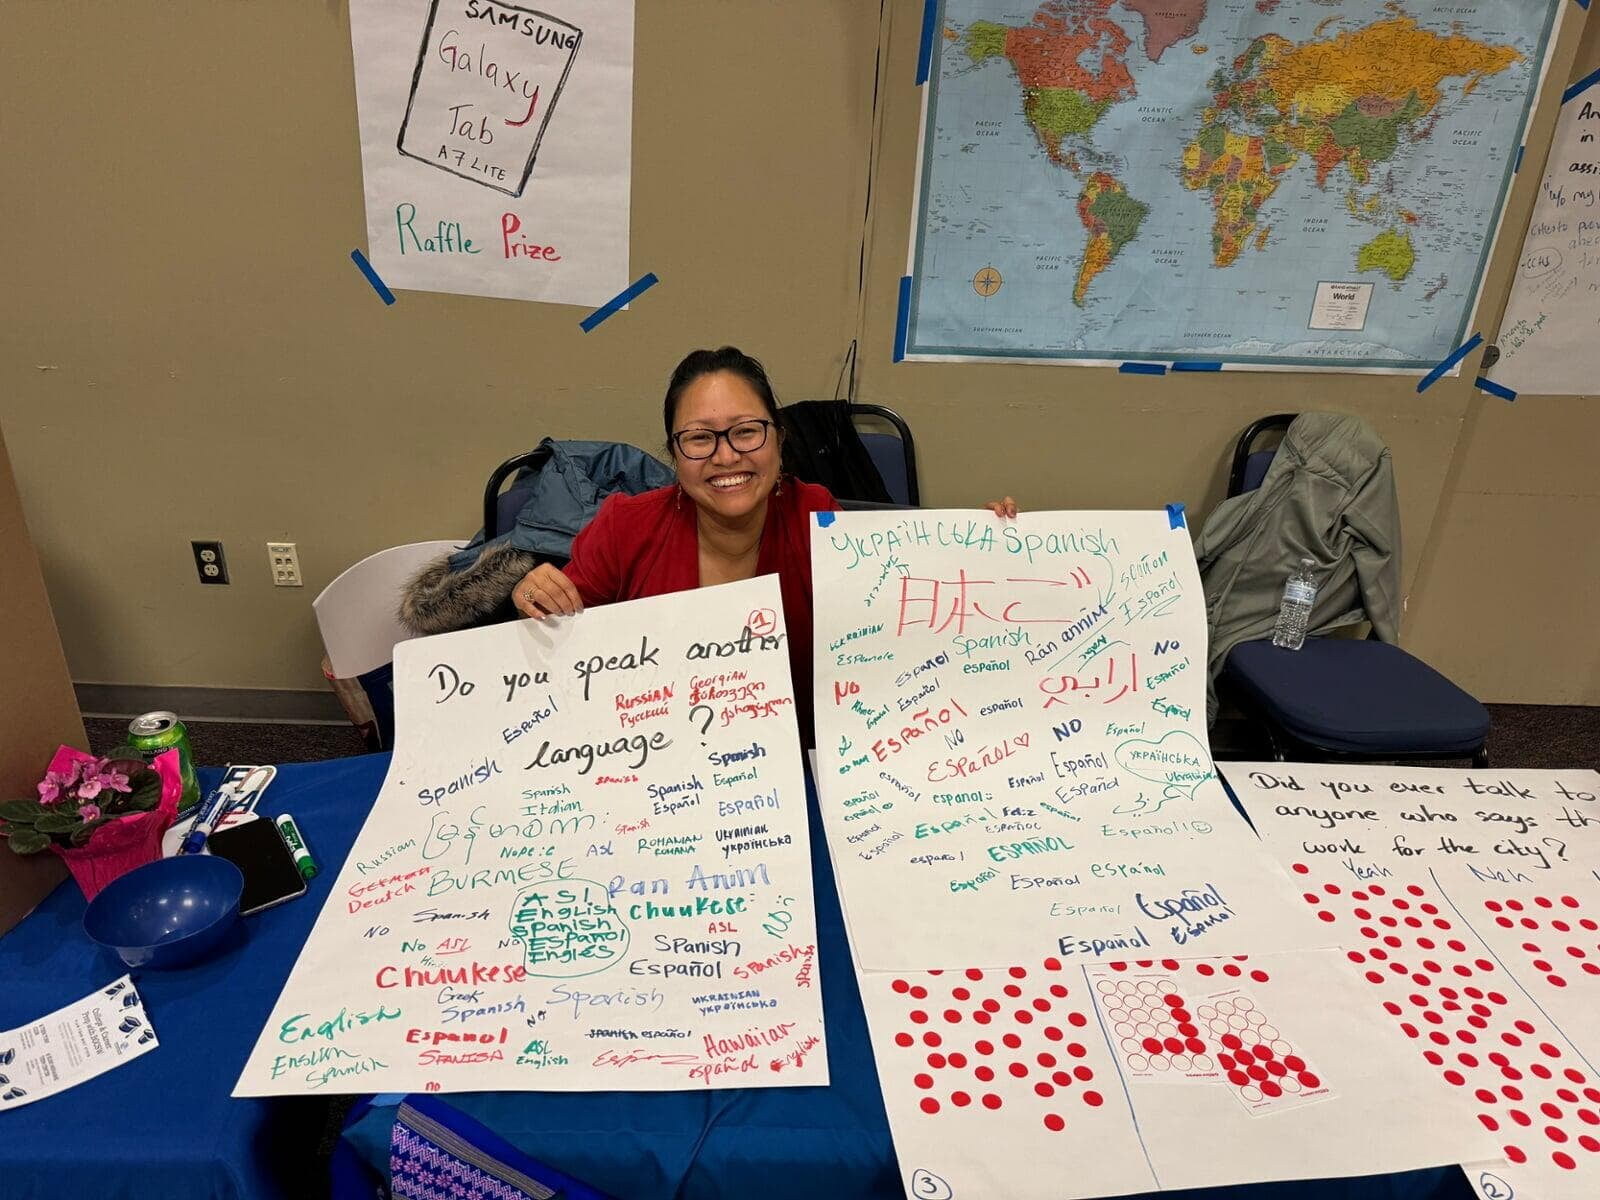 Charis at a community engagement event with language signs